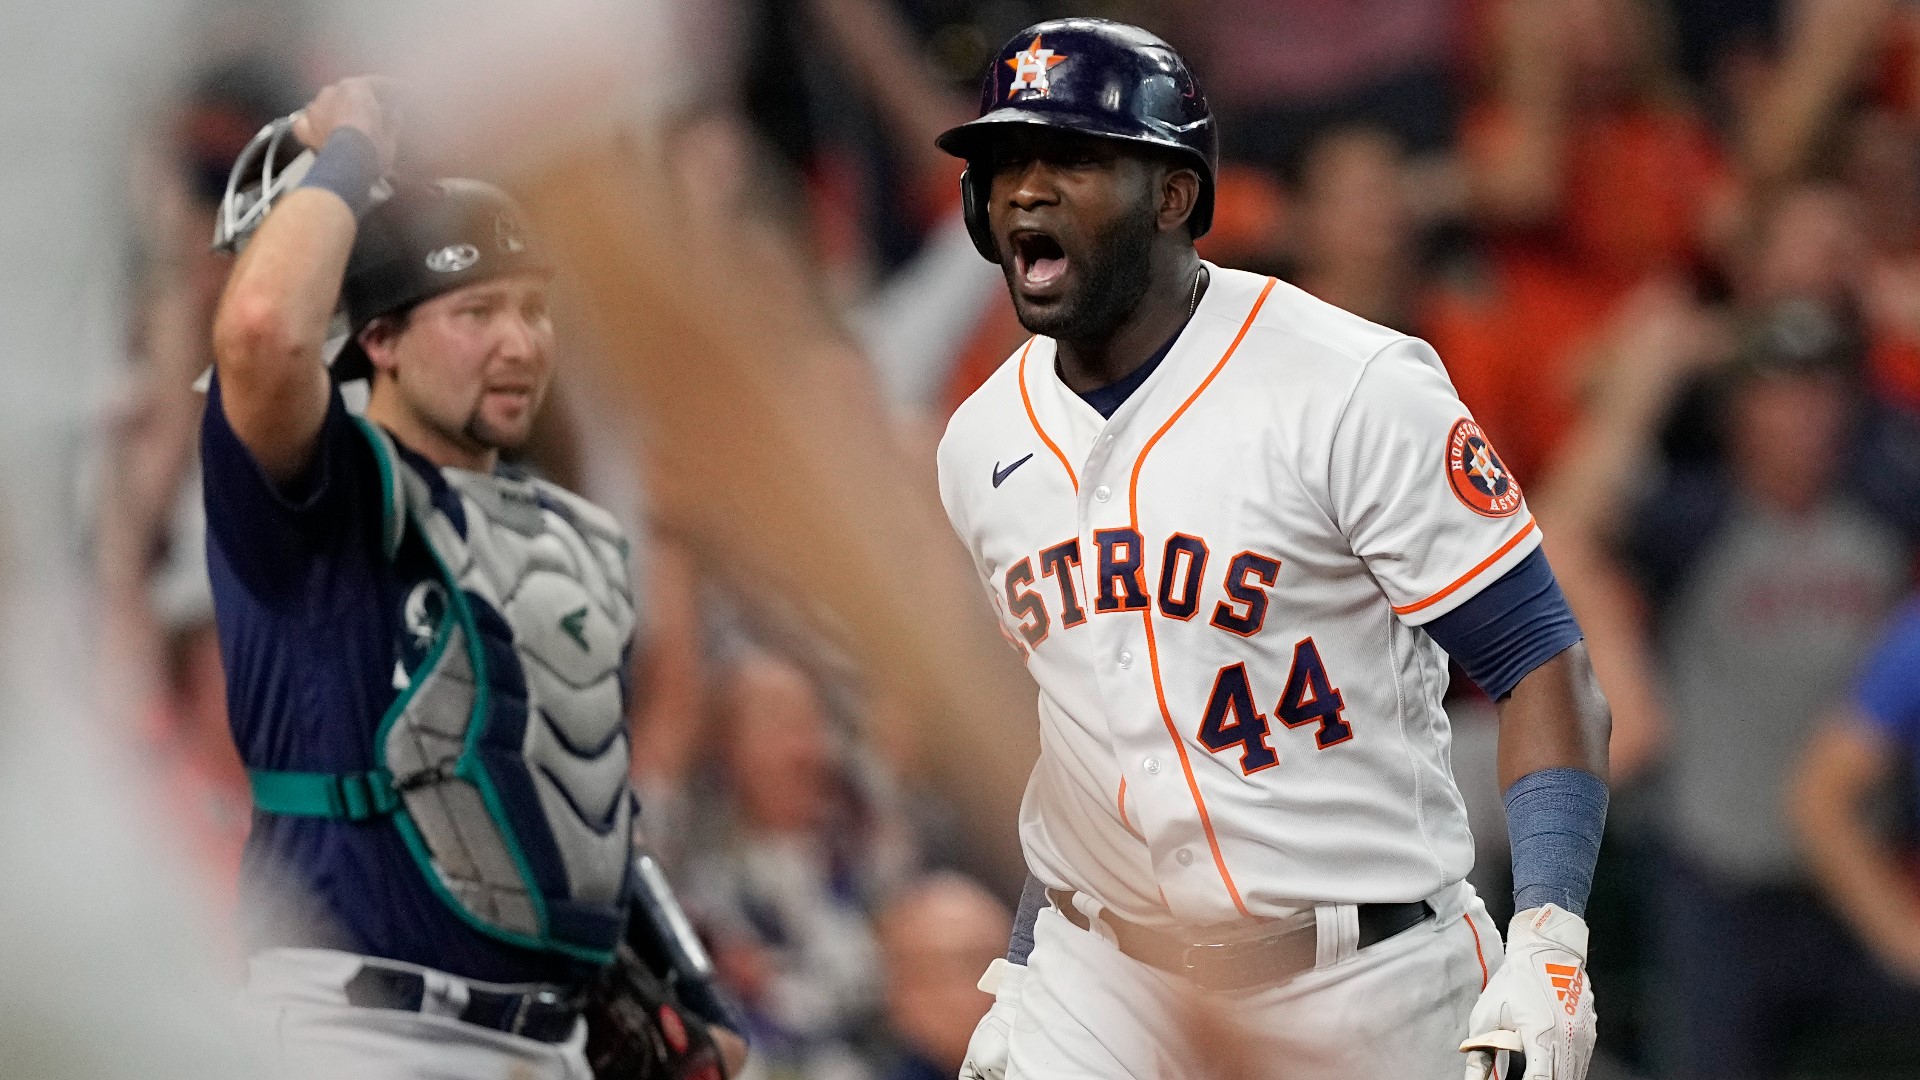 The Astros are up 1-0 in their American League Division Series against the Mariners after  Yordan Alvarez's walk-off three-run home run.